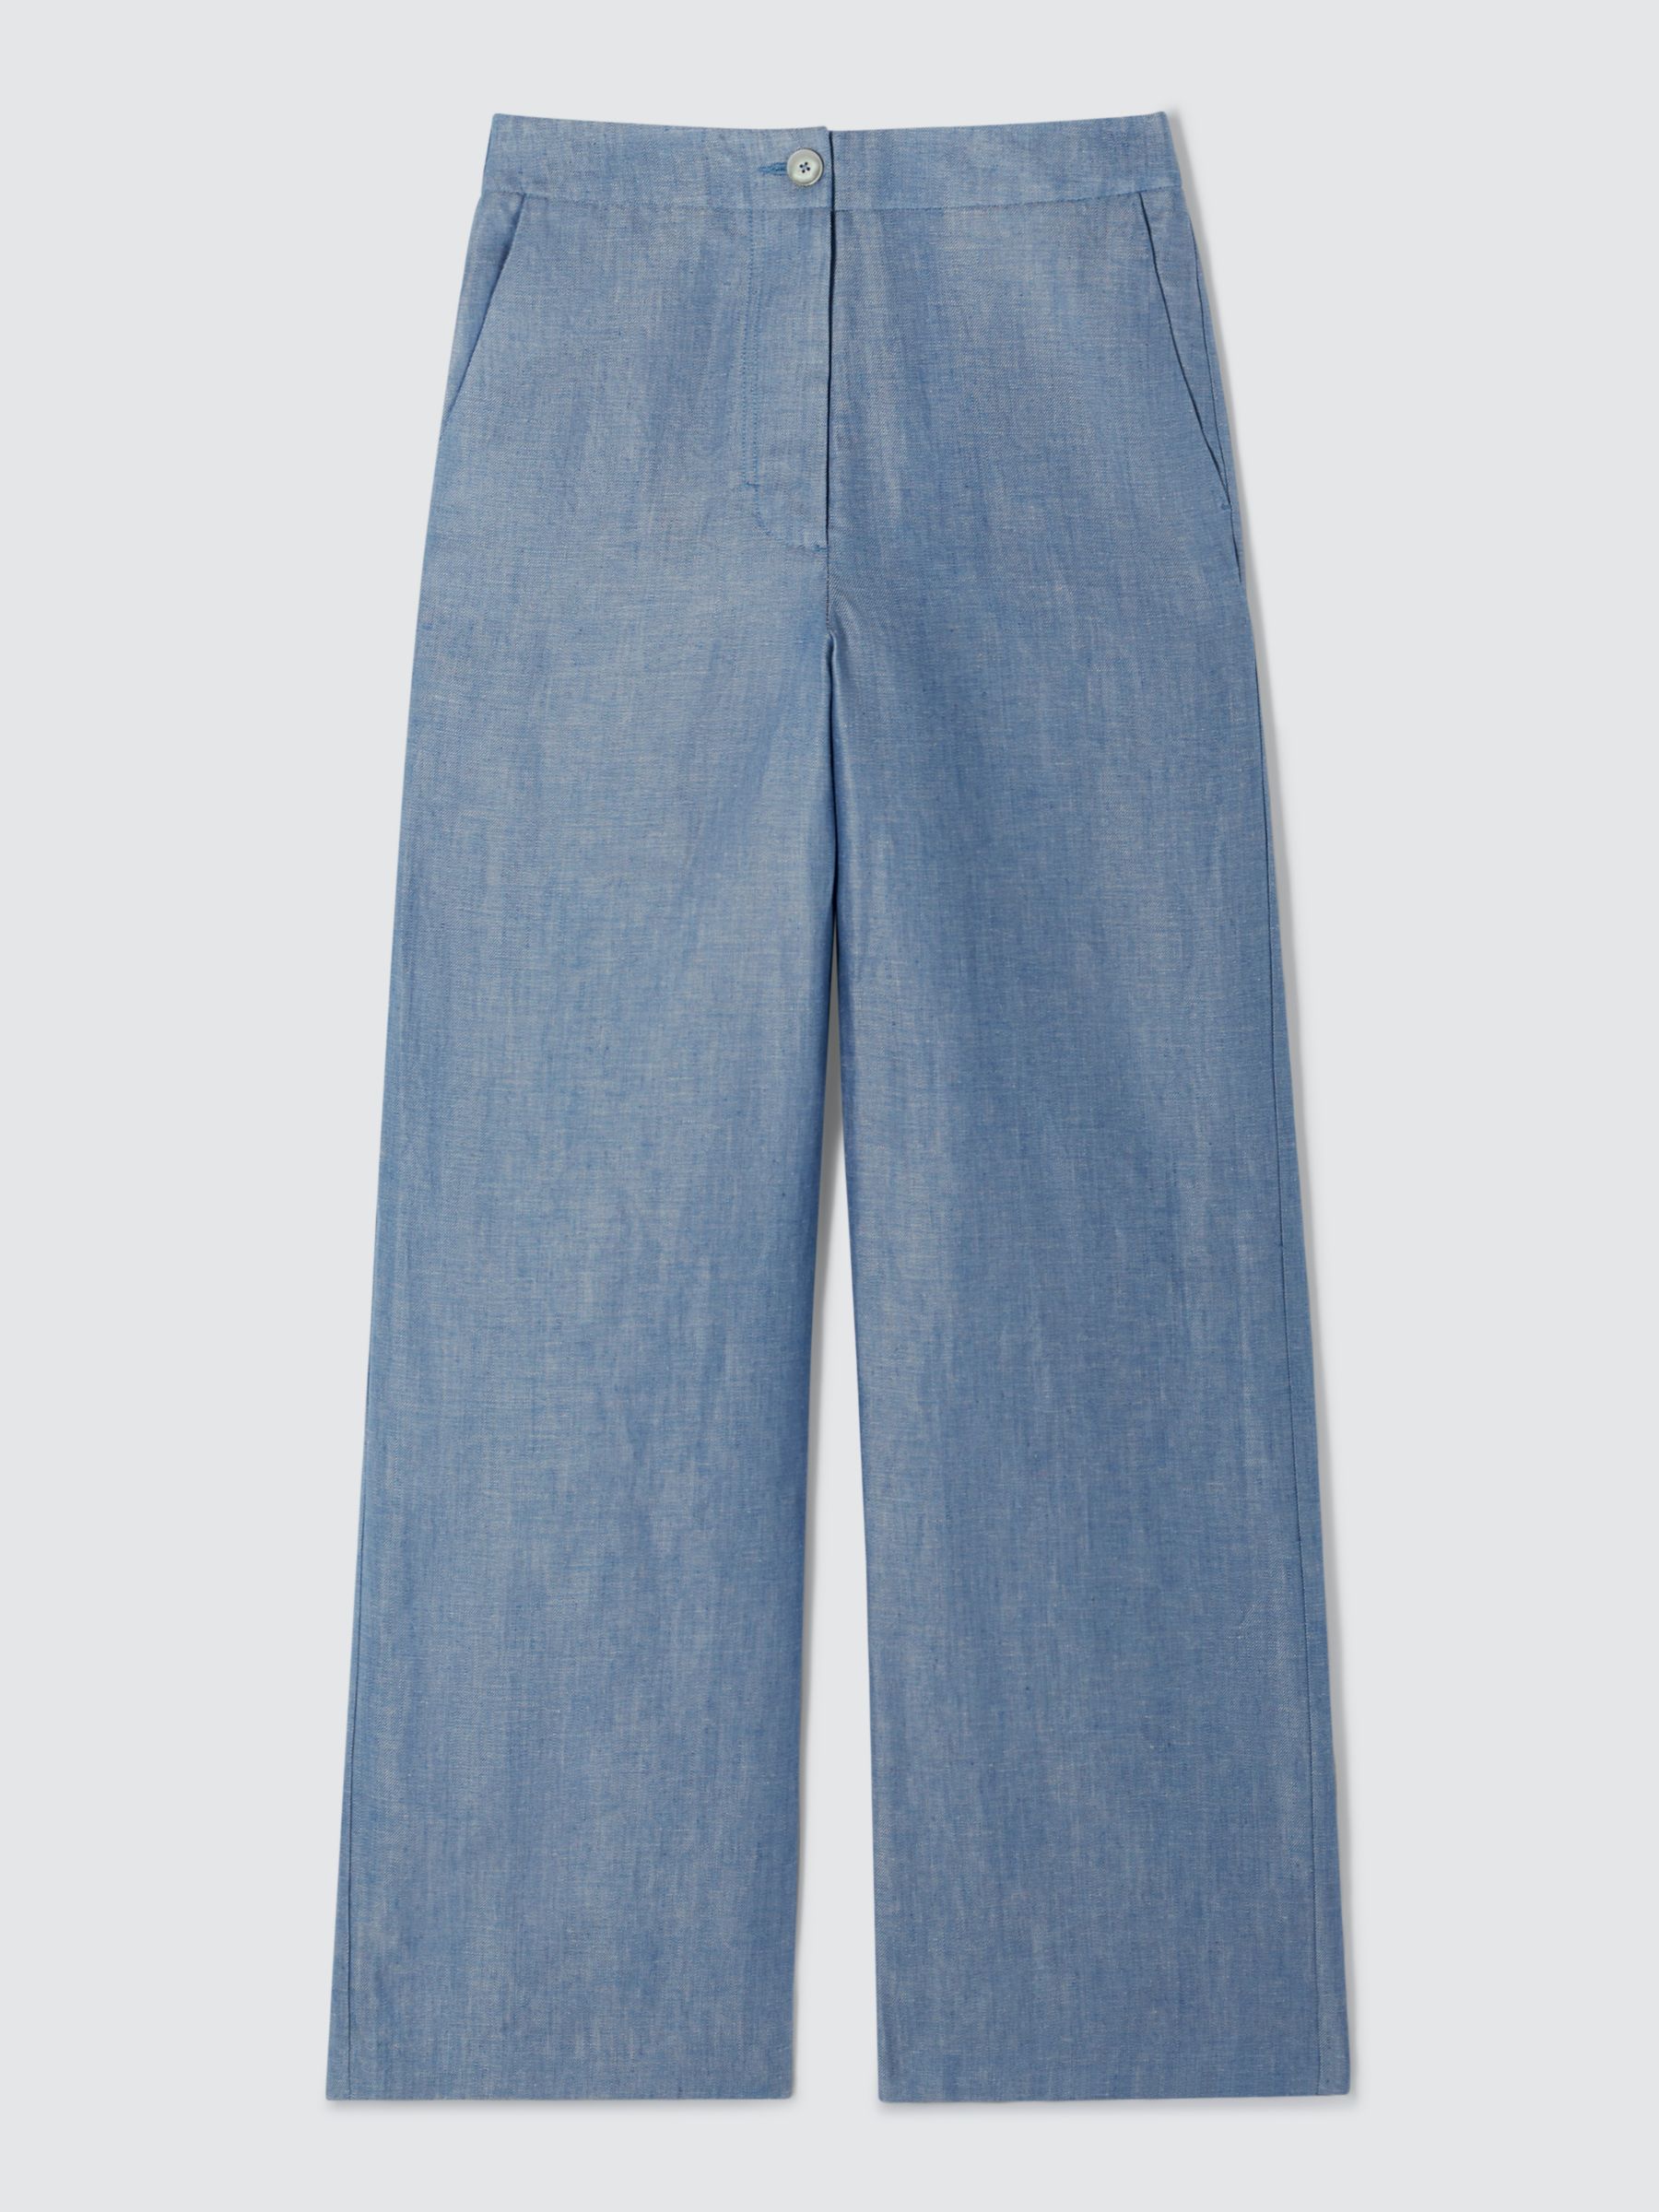 John Lewis Straight Fit Linen Trousers, Blue Twill, 8